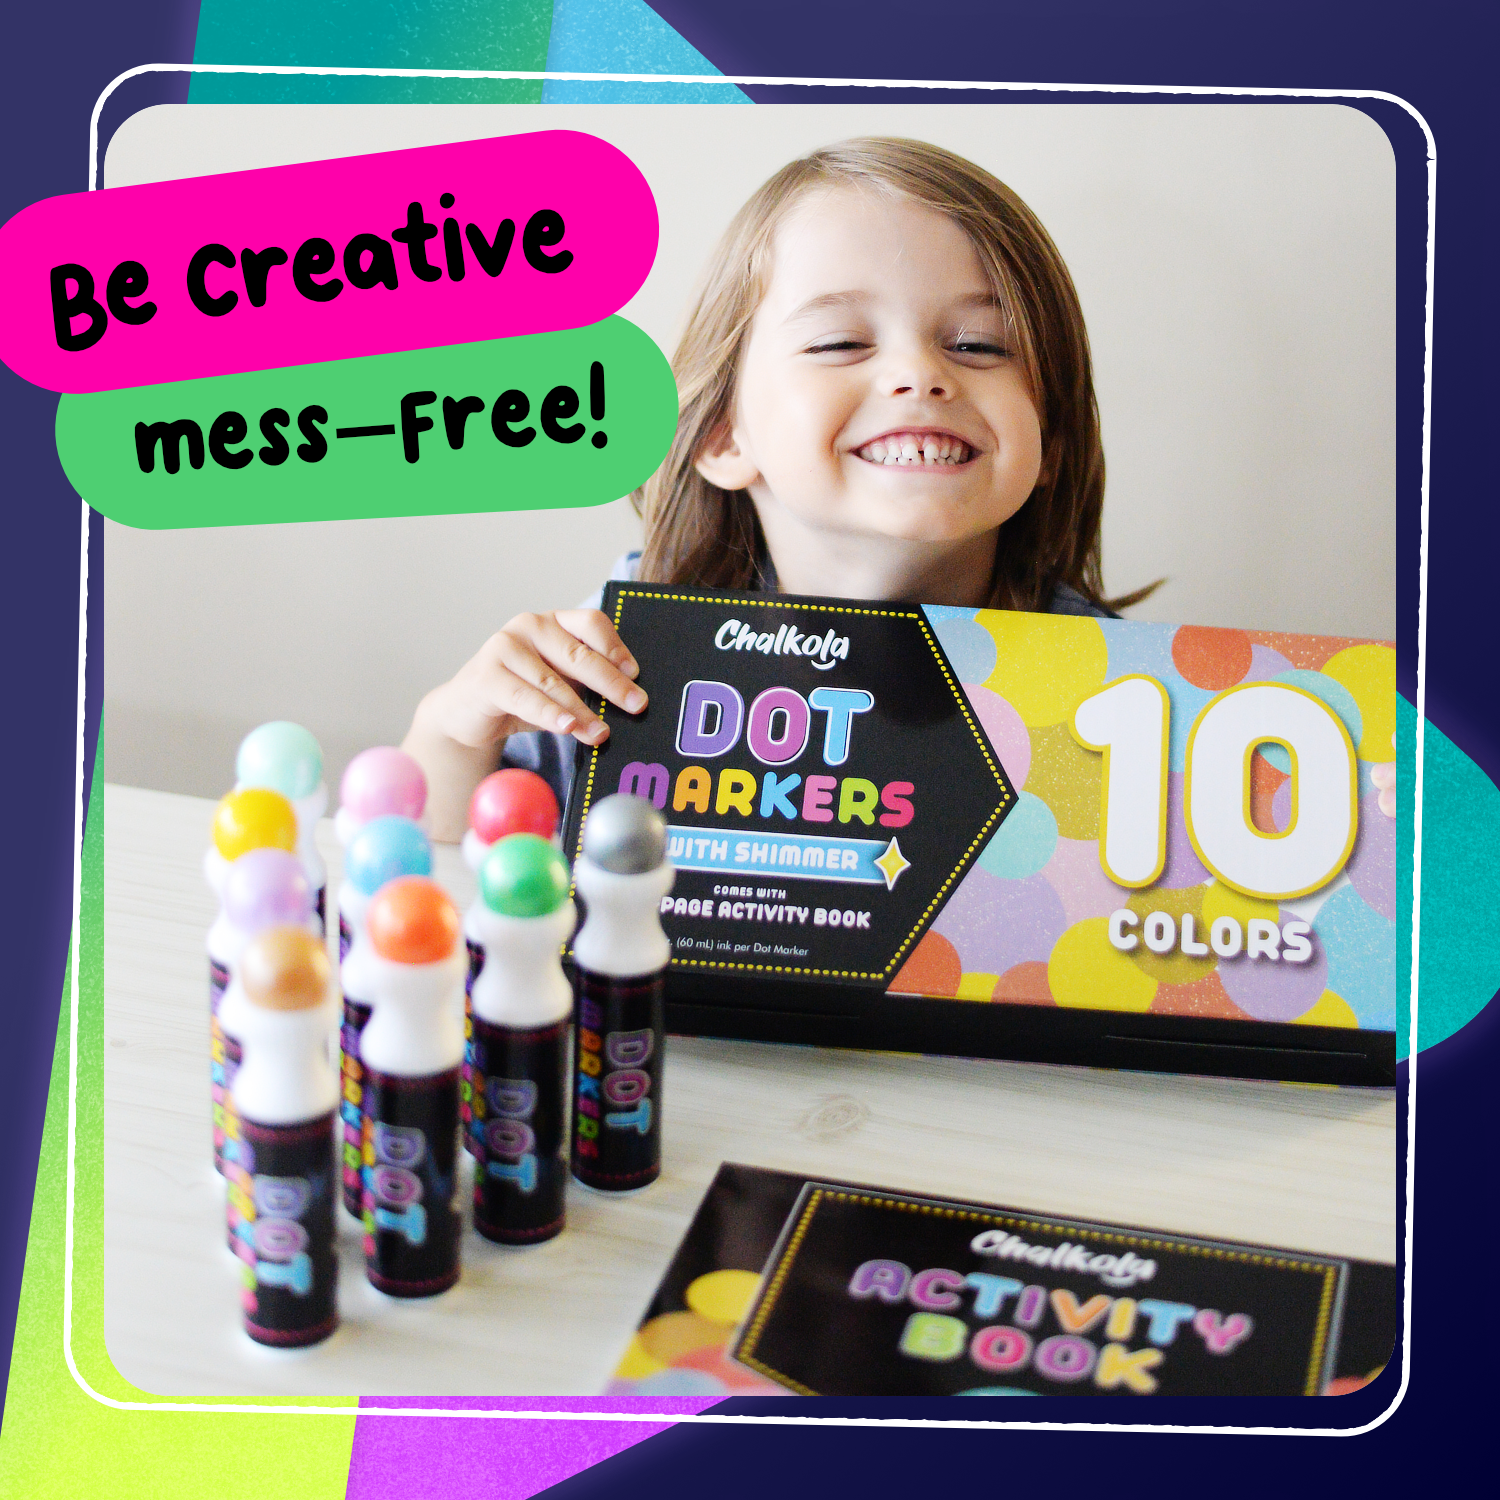 Chalkola 10 Washable Dot Markers for Toddlers with Free Activity Book - Dot  Paints for Toddlers, Bingo Markers, Dot Art Kits for Kids & Preschool,  Dabbers Dot Paint Marker